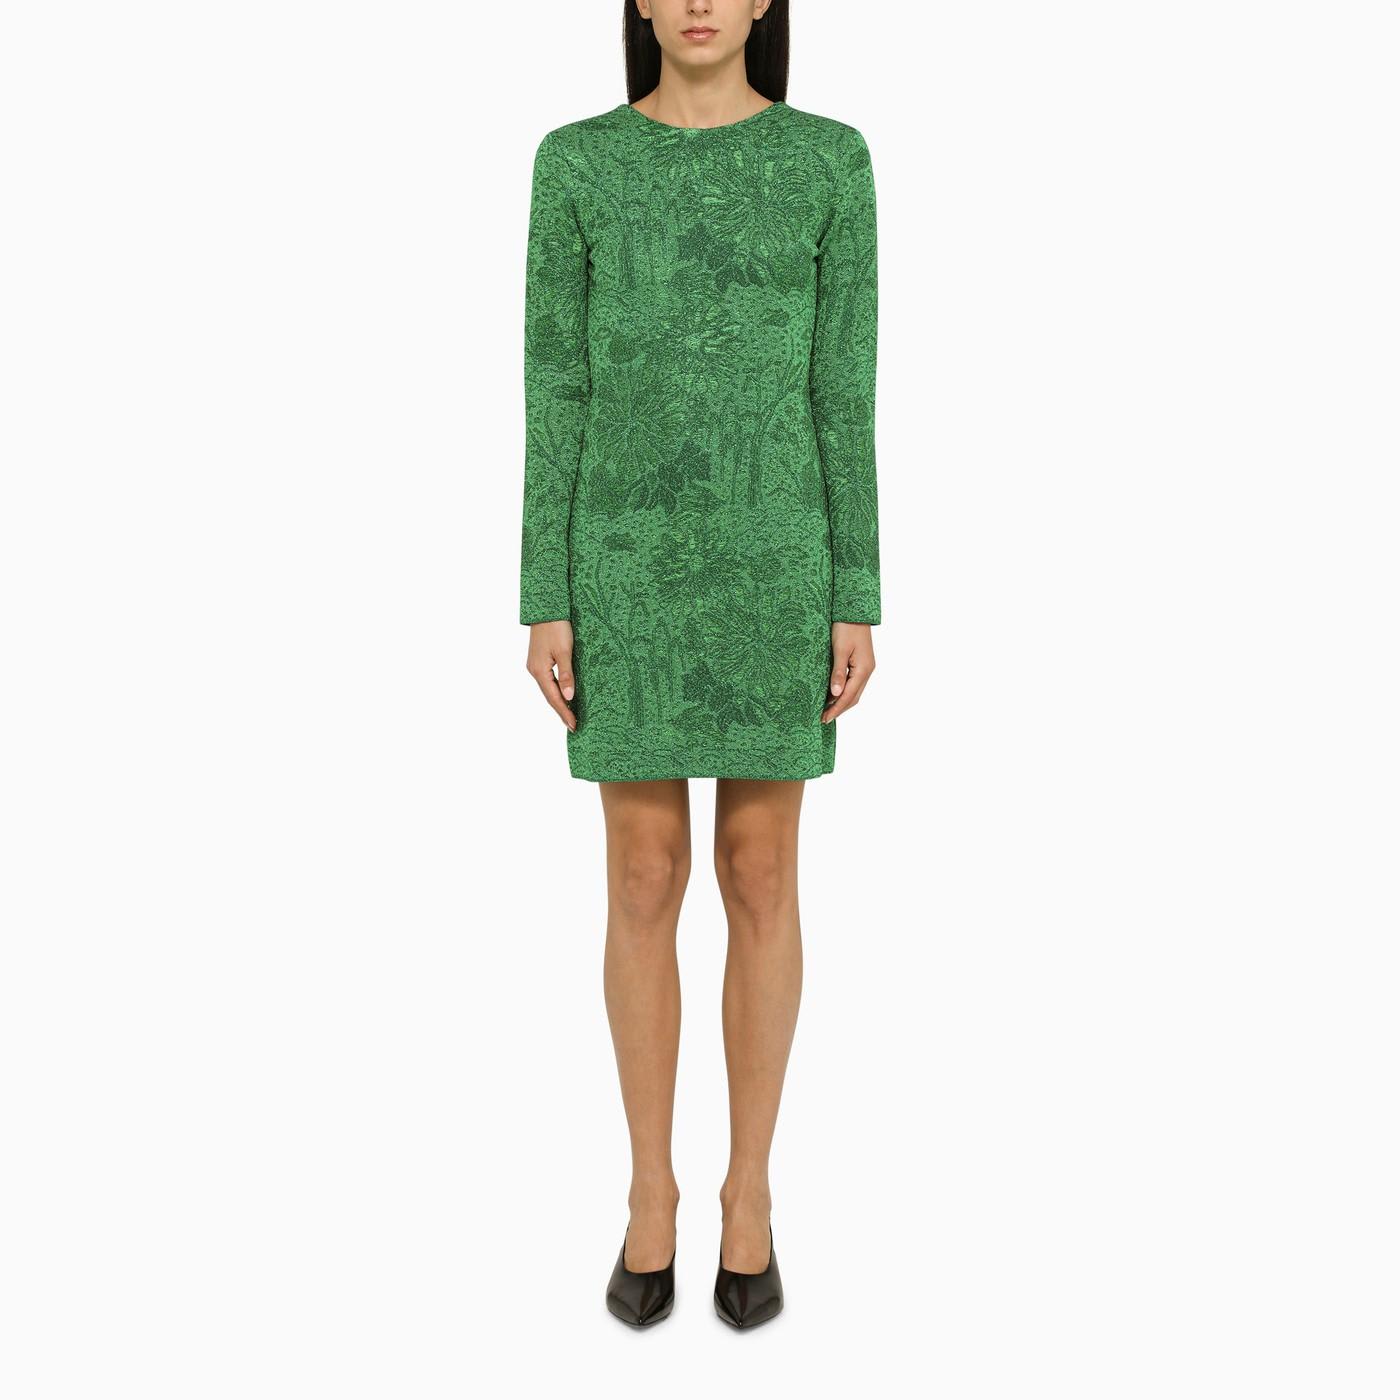 GIVENCHY GREEN LUREX AND FLORAL JACQUARD DRESS